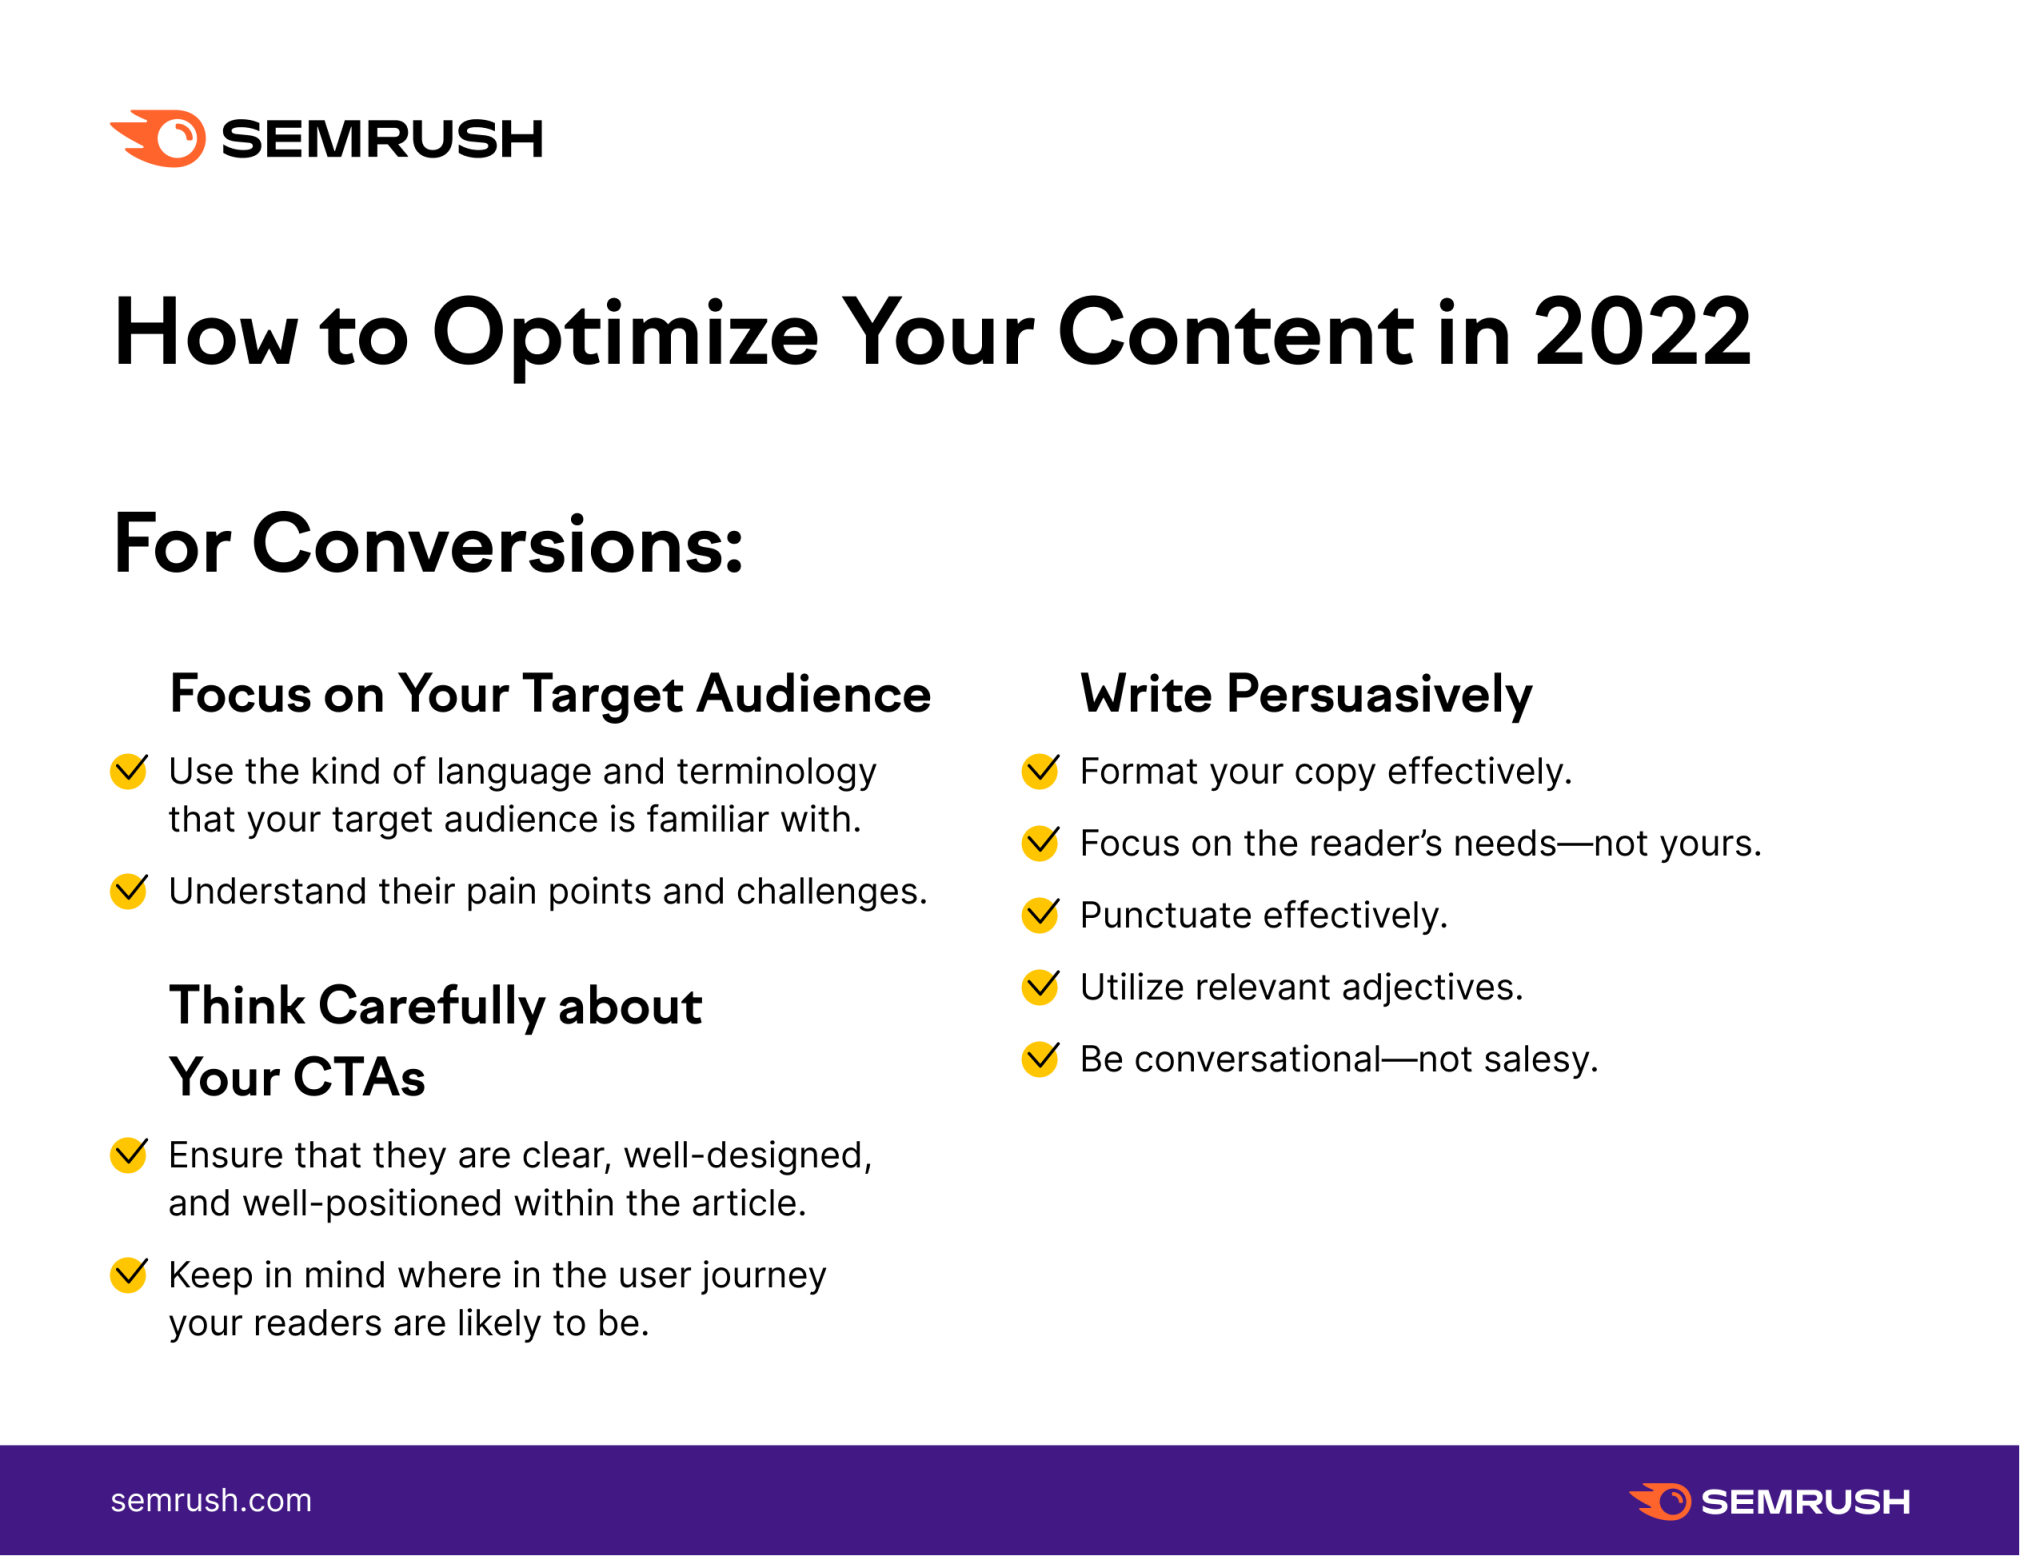 How to optimize content for conversions